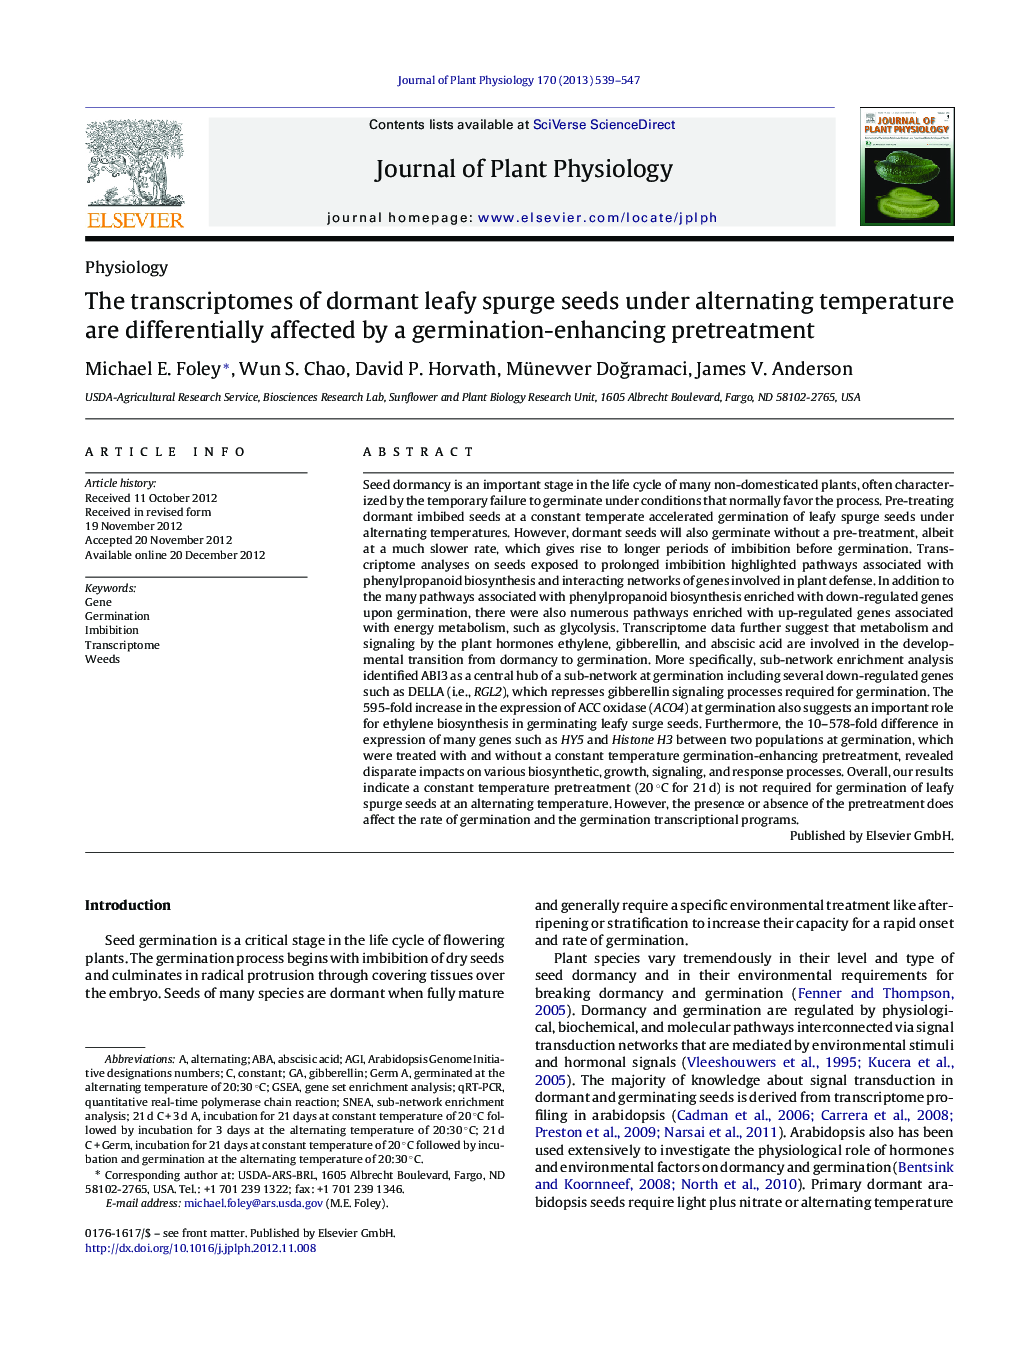 The transcriptomes of dormant leafy spurge seeds under alternating temperature are differentially affected by a germination-enhancing pretreatment